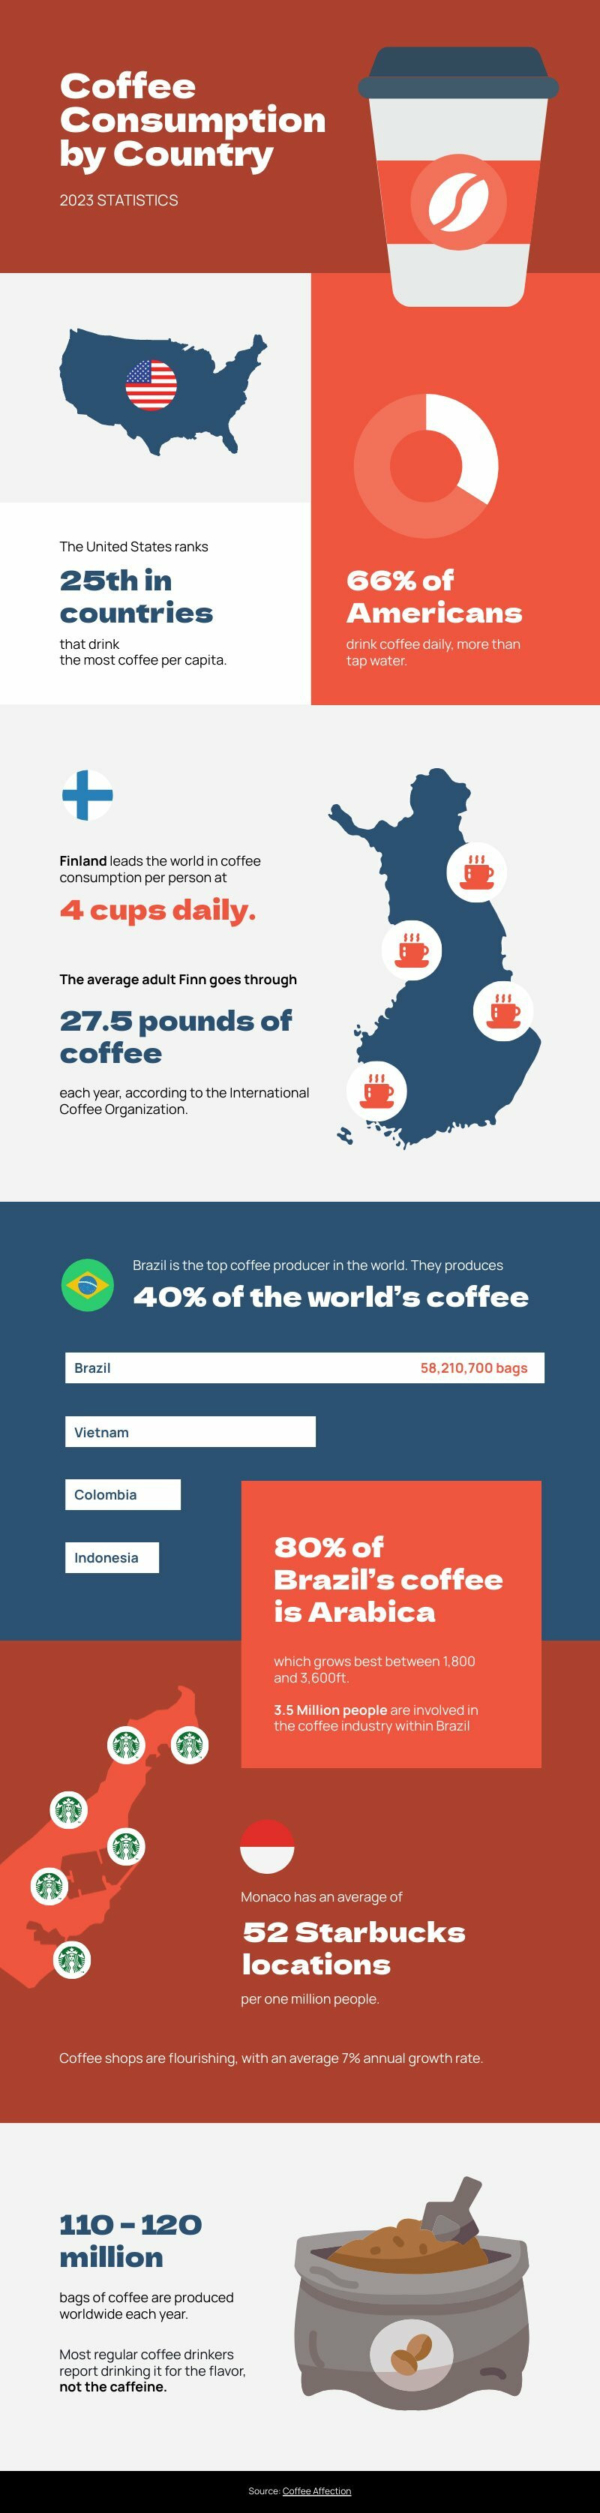 Coffee Consumption by Country